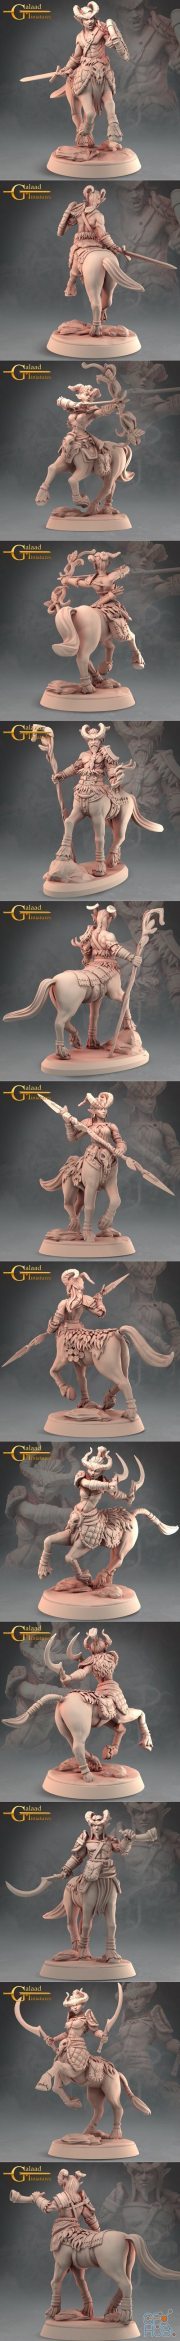 Into The Woods - Centaurs – 3D Print